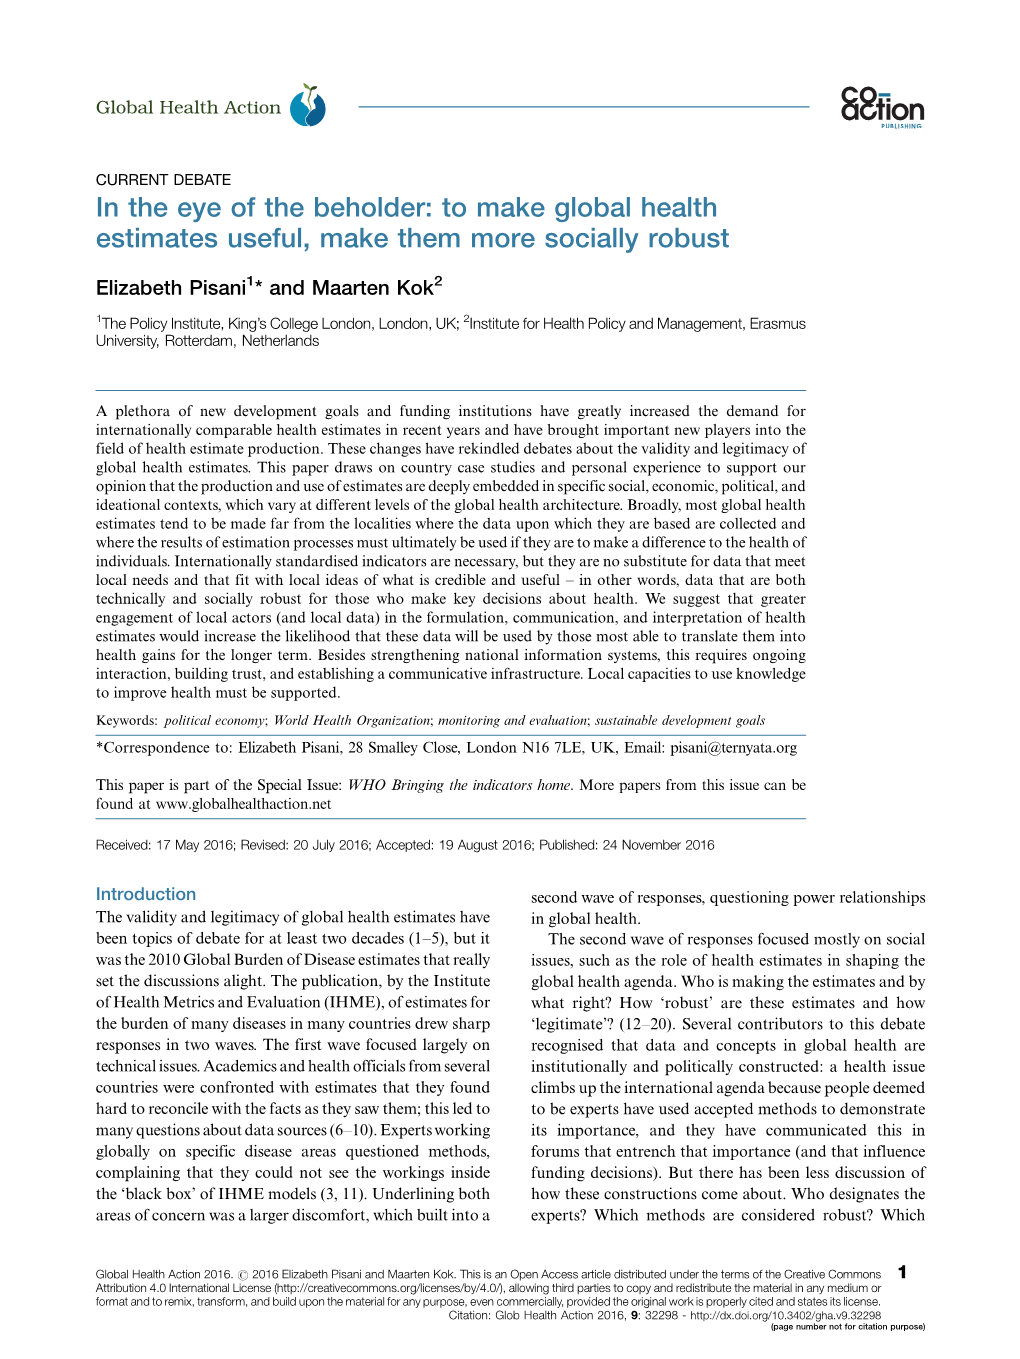 In the Eye of the Beholder: to Make Global Health Estimates Useful, Make Them More Socially Robust